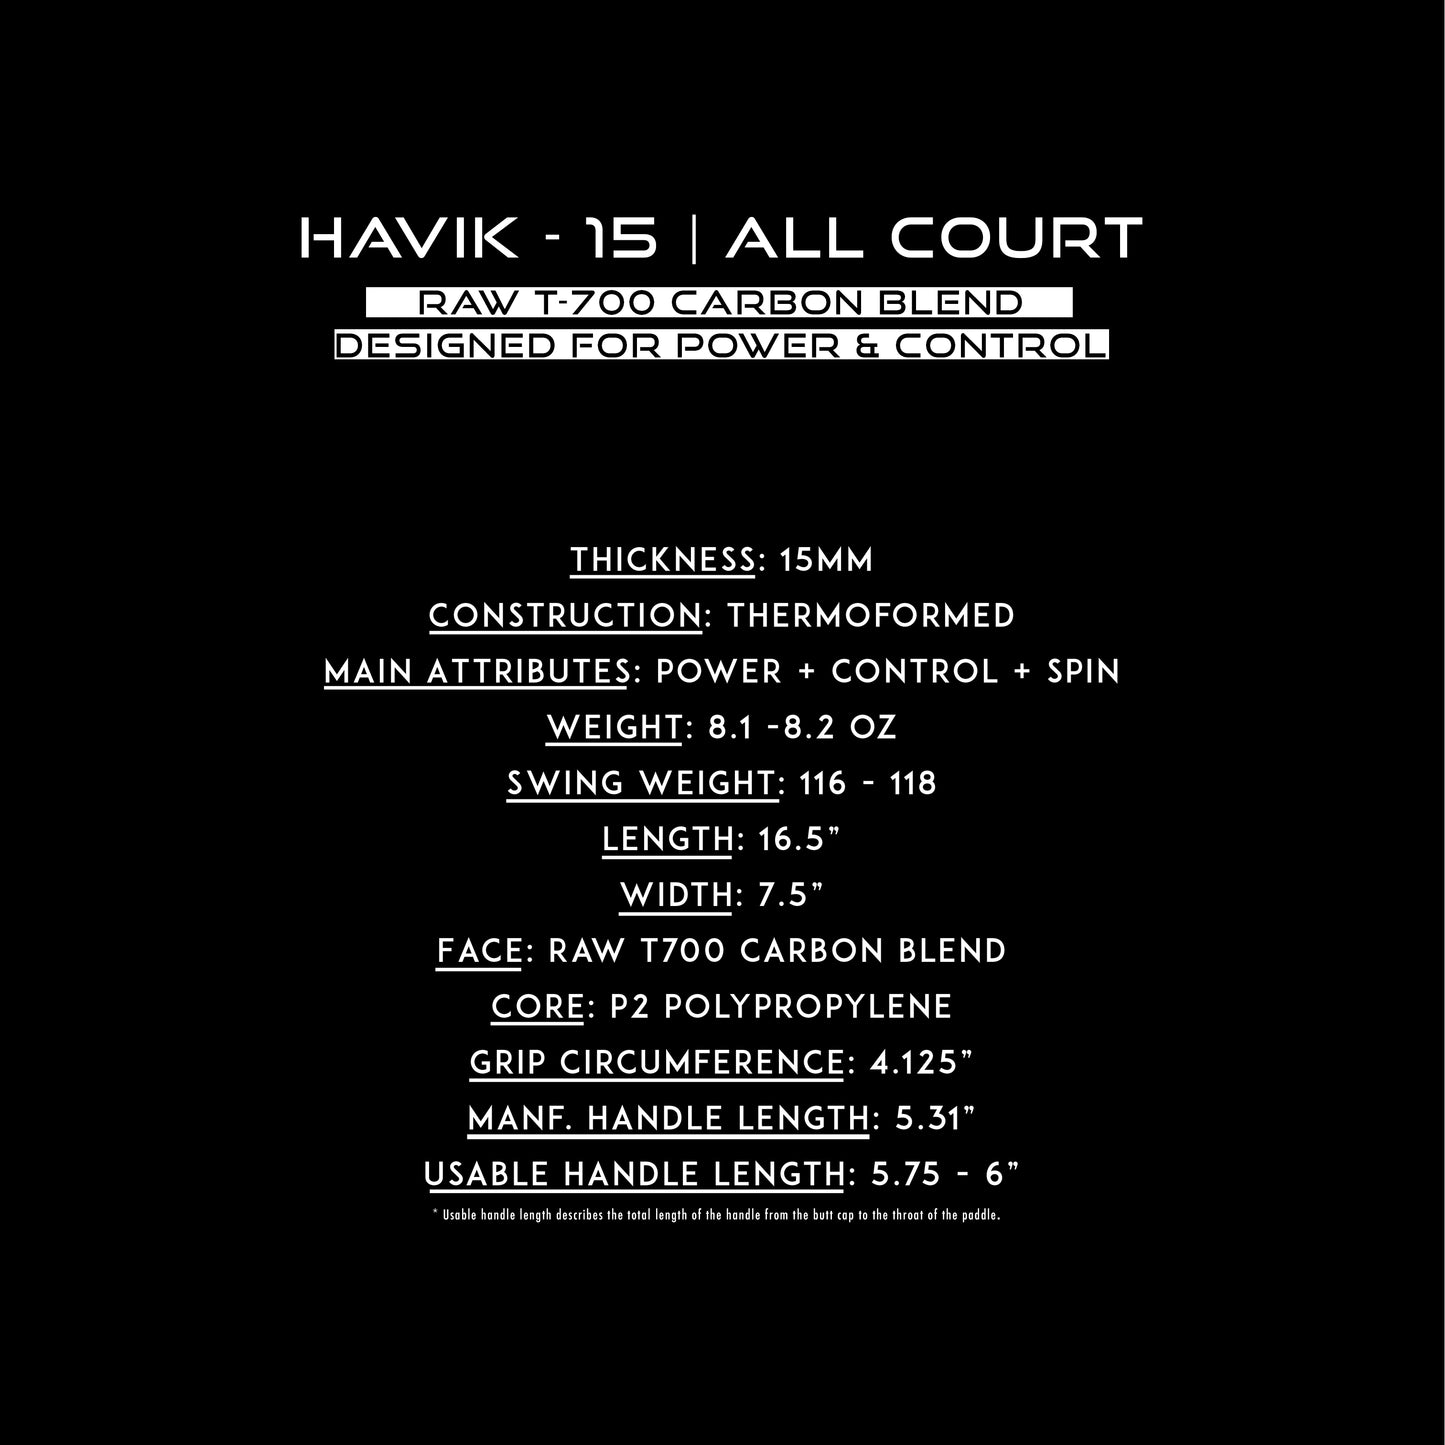 Havik - 15 ALL COURT   **** PRE SALE 2 (Shipping May 30)